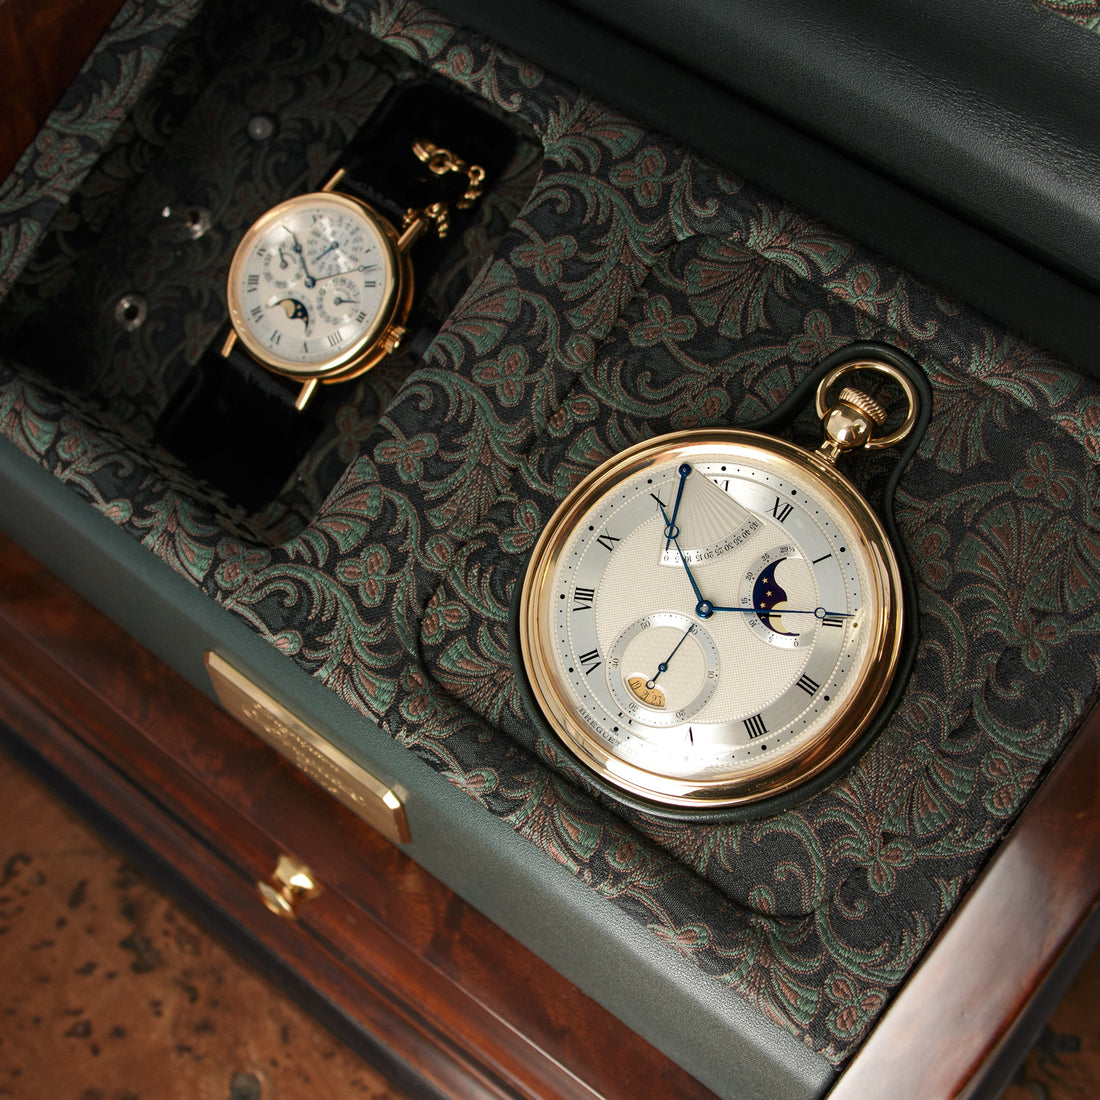 Breguet Yellow Gold Minute Repeating Perpetual Subscription Set